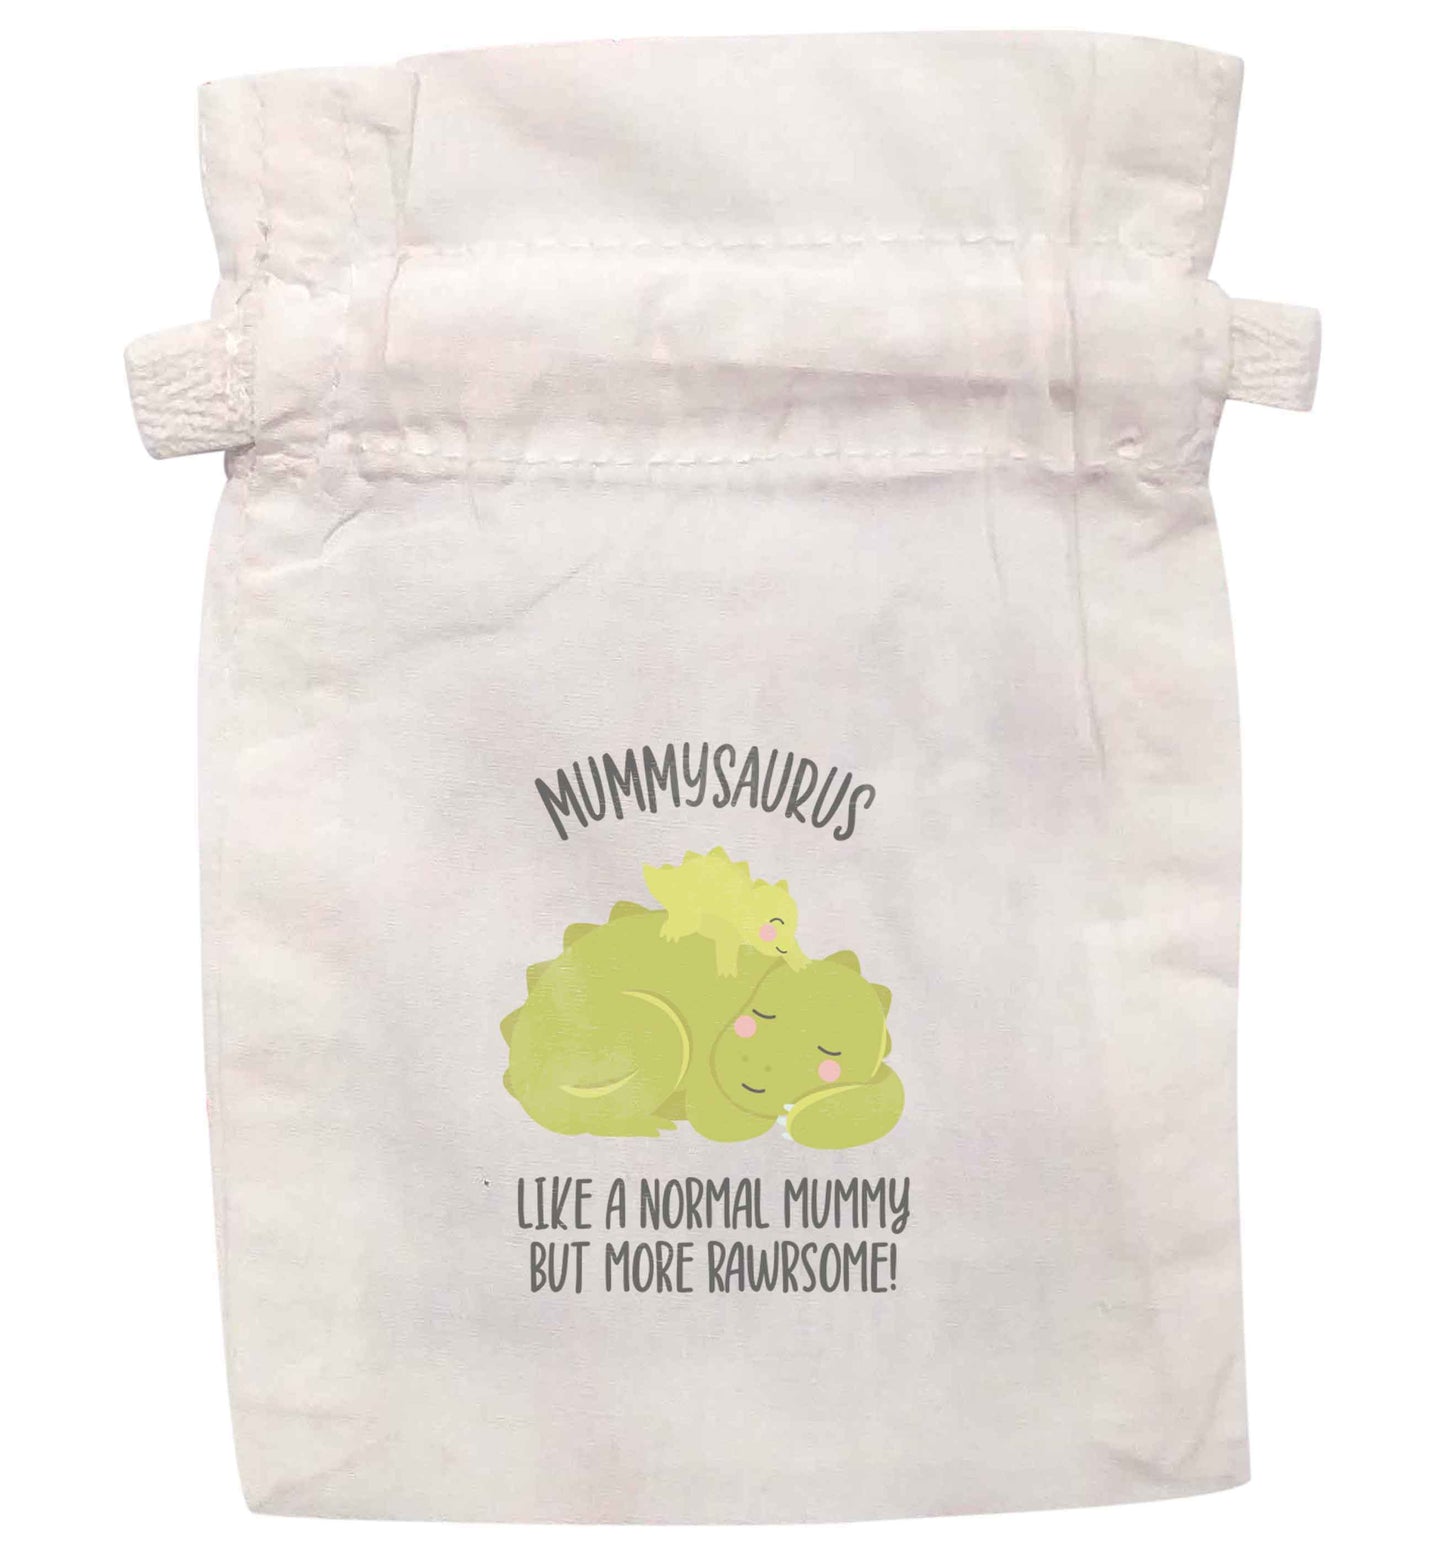 Mummysaurus like a normal mummy only more rawrsome | XS - L | Pouch / Drawstring bag / Sack | Organic Cotton | Bulk discounts available!